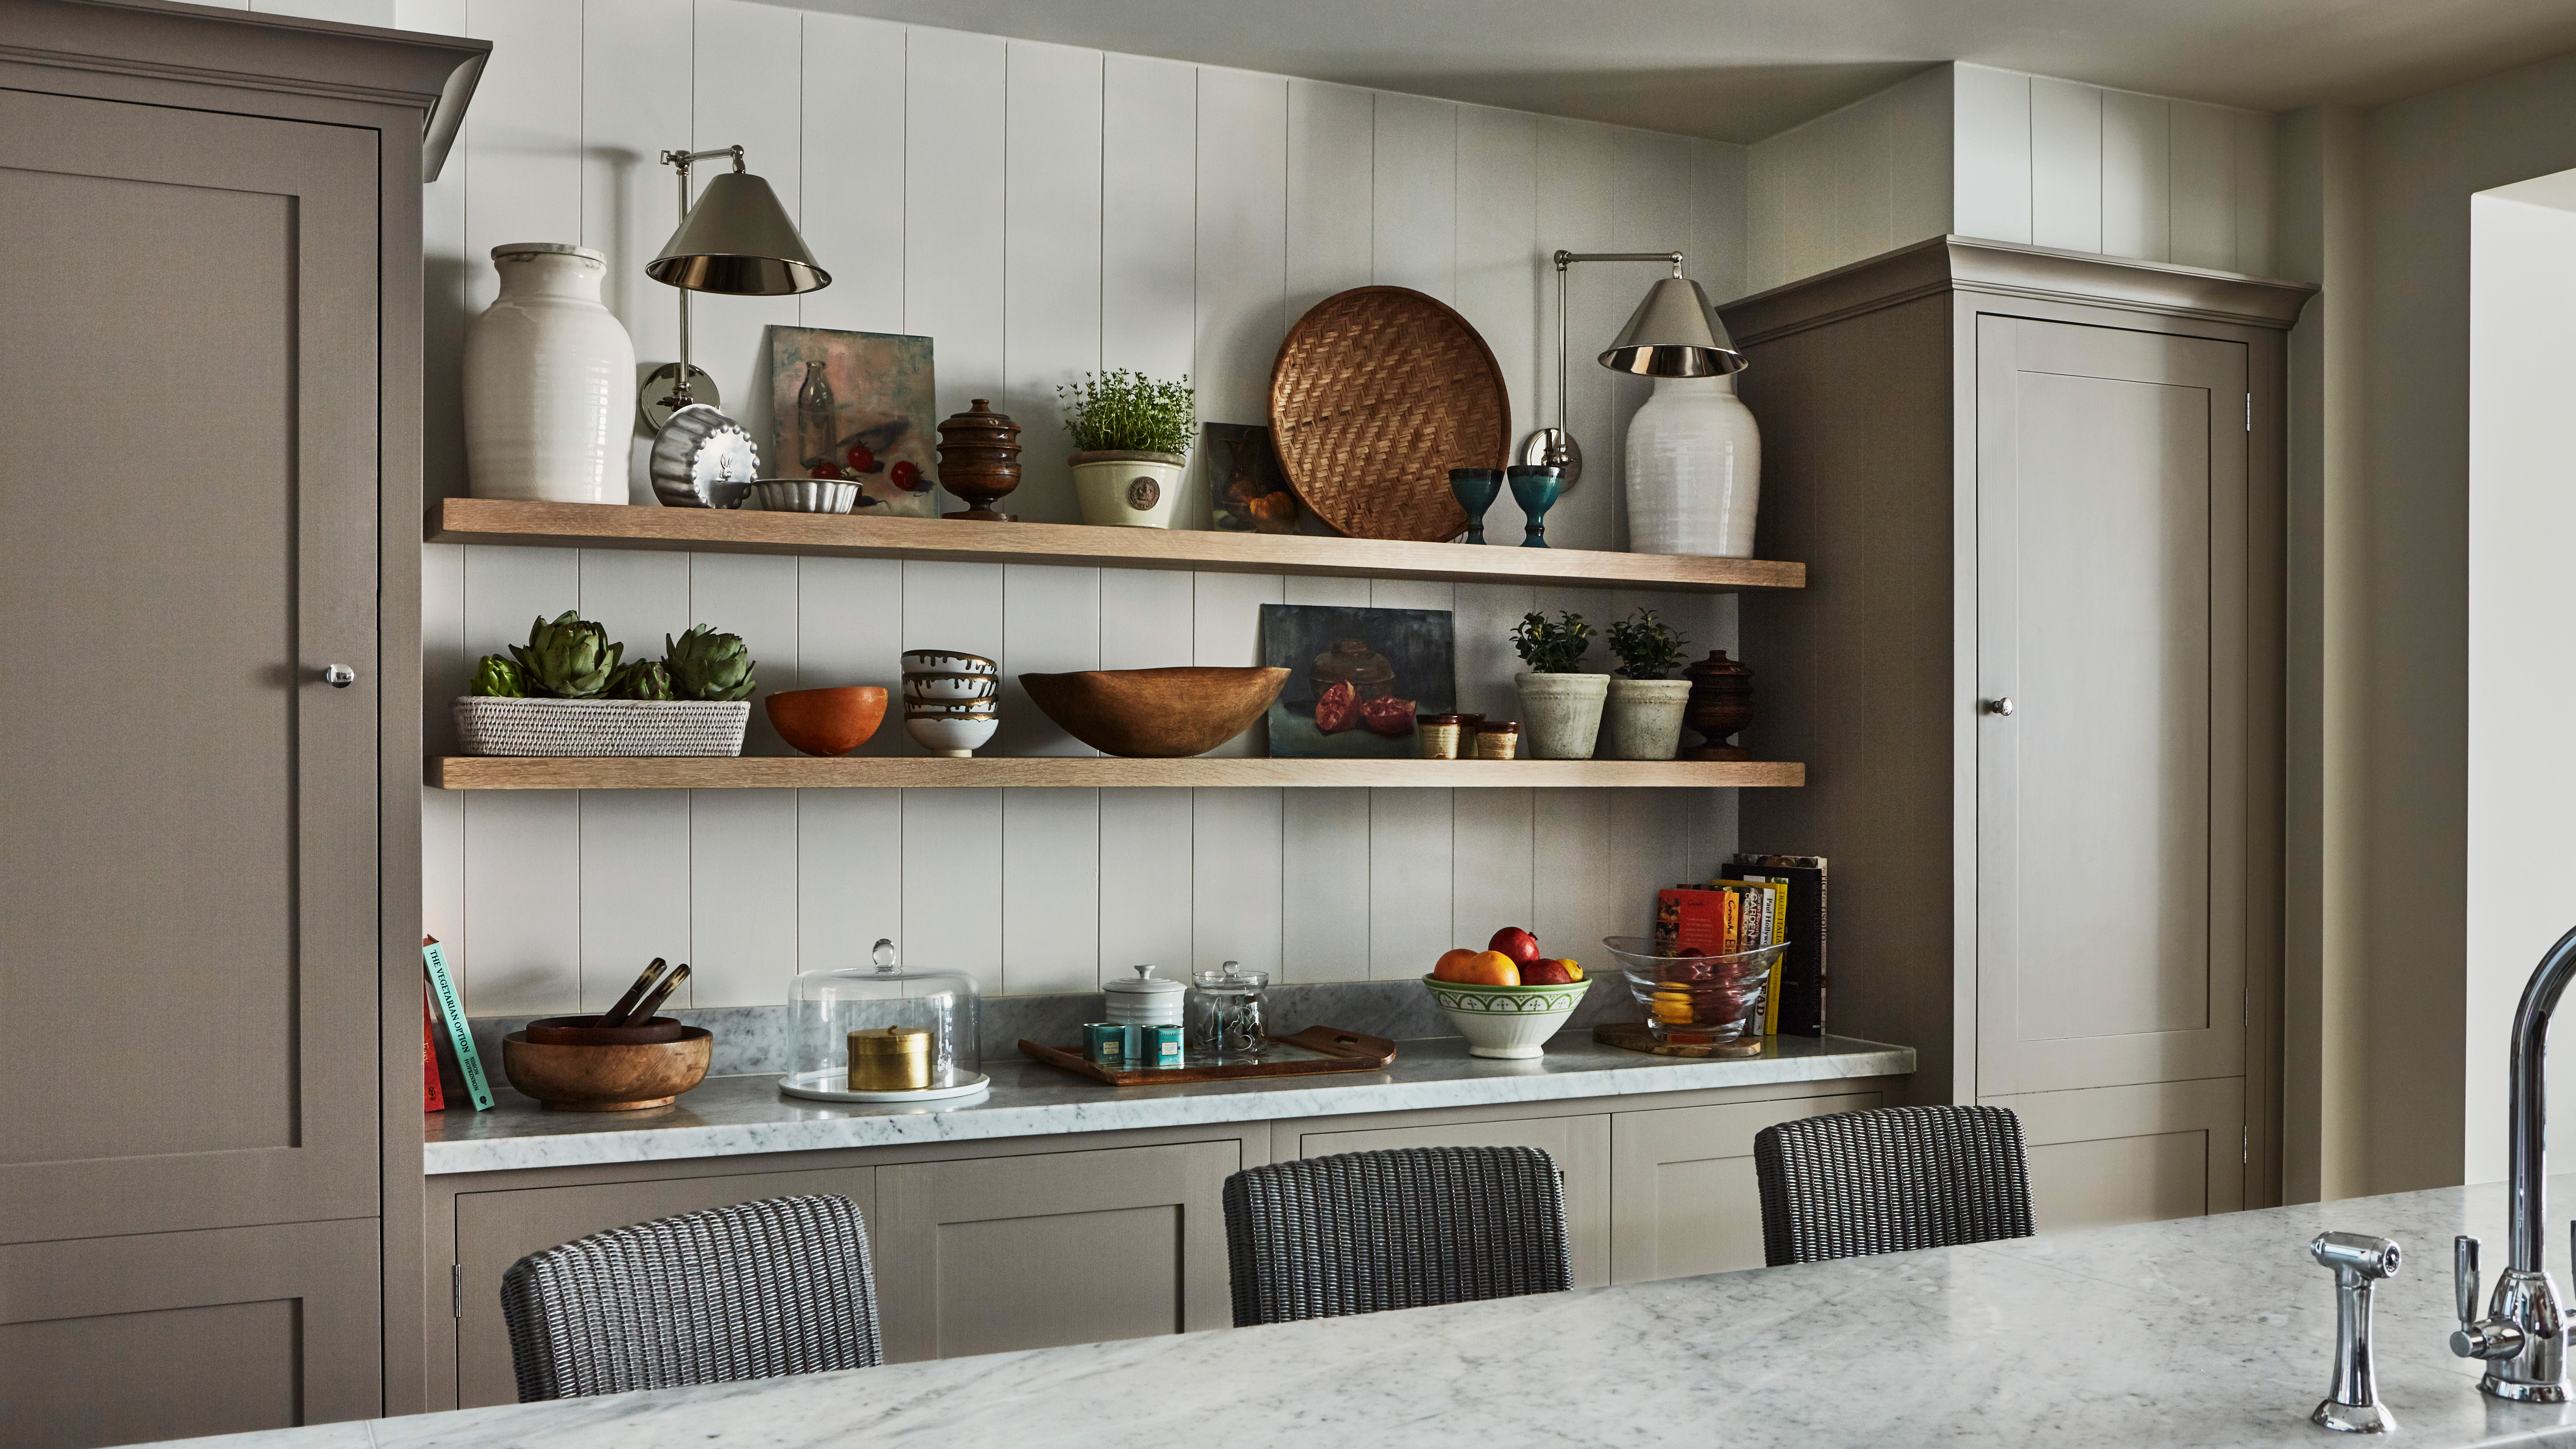 Kitchen Shelving Ideas 14 Ways To, How To Organize Open Shelves In Kitchen